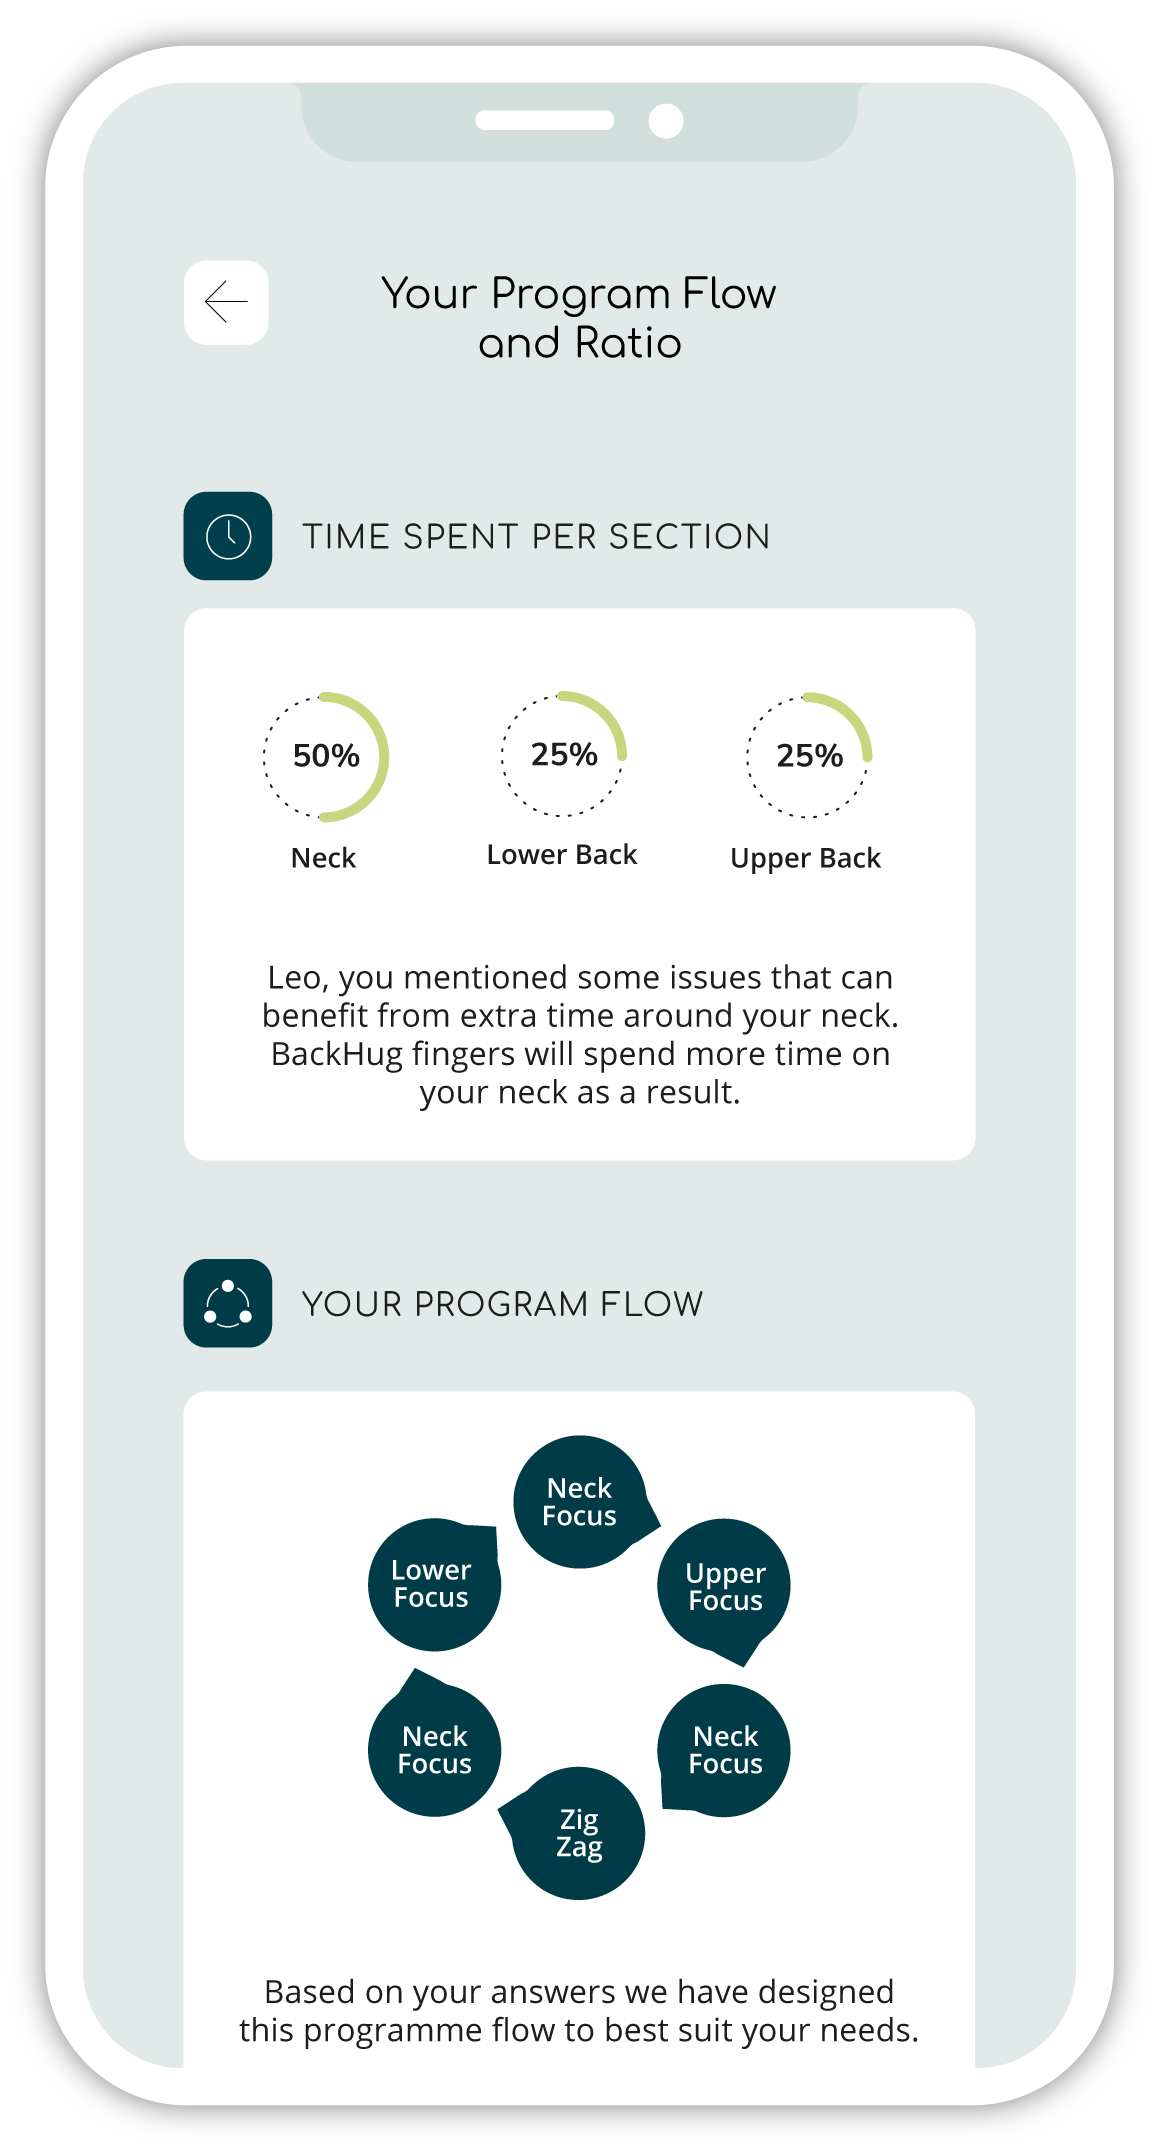 Phone screen showing BackHug session summary: time spent per section, and program flow